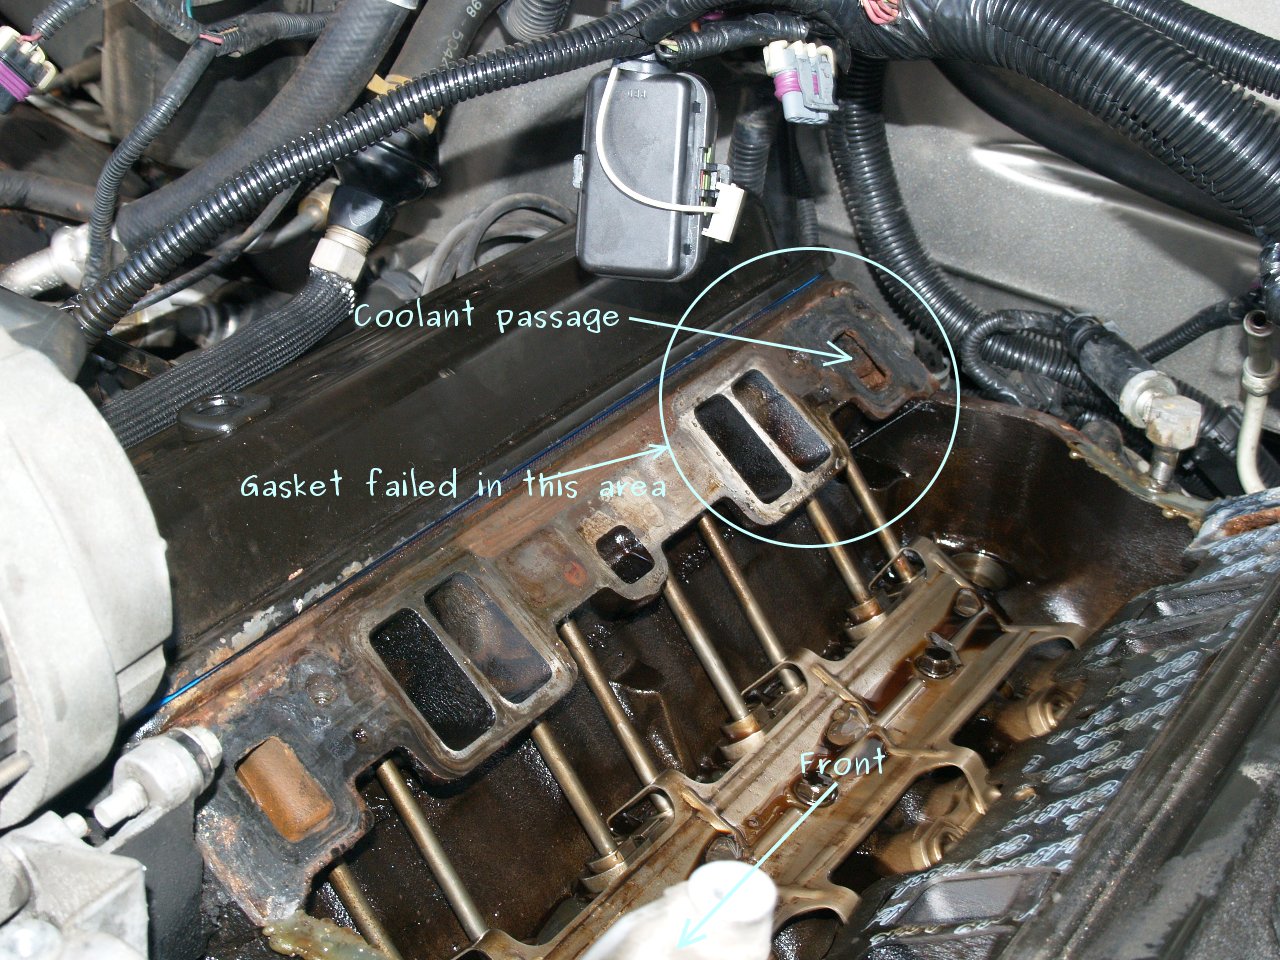 See P2910 in engine